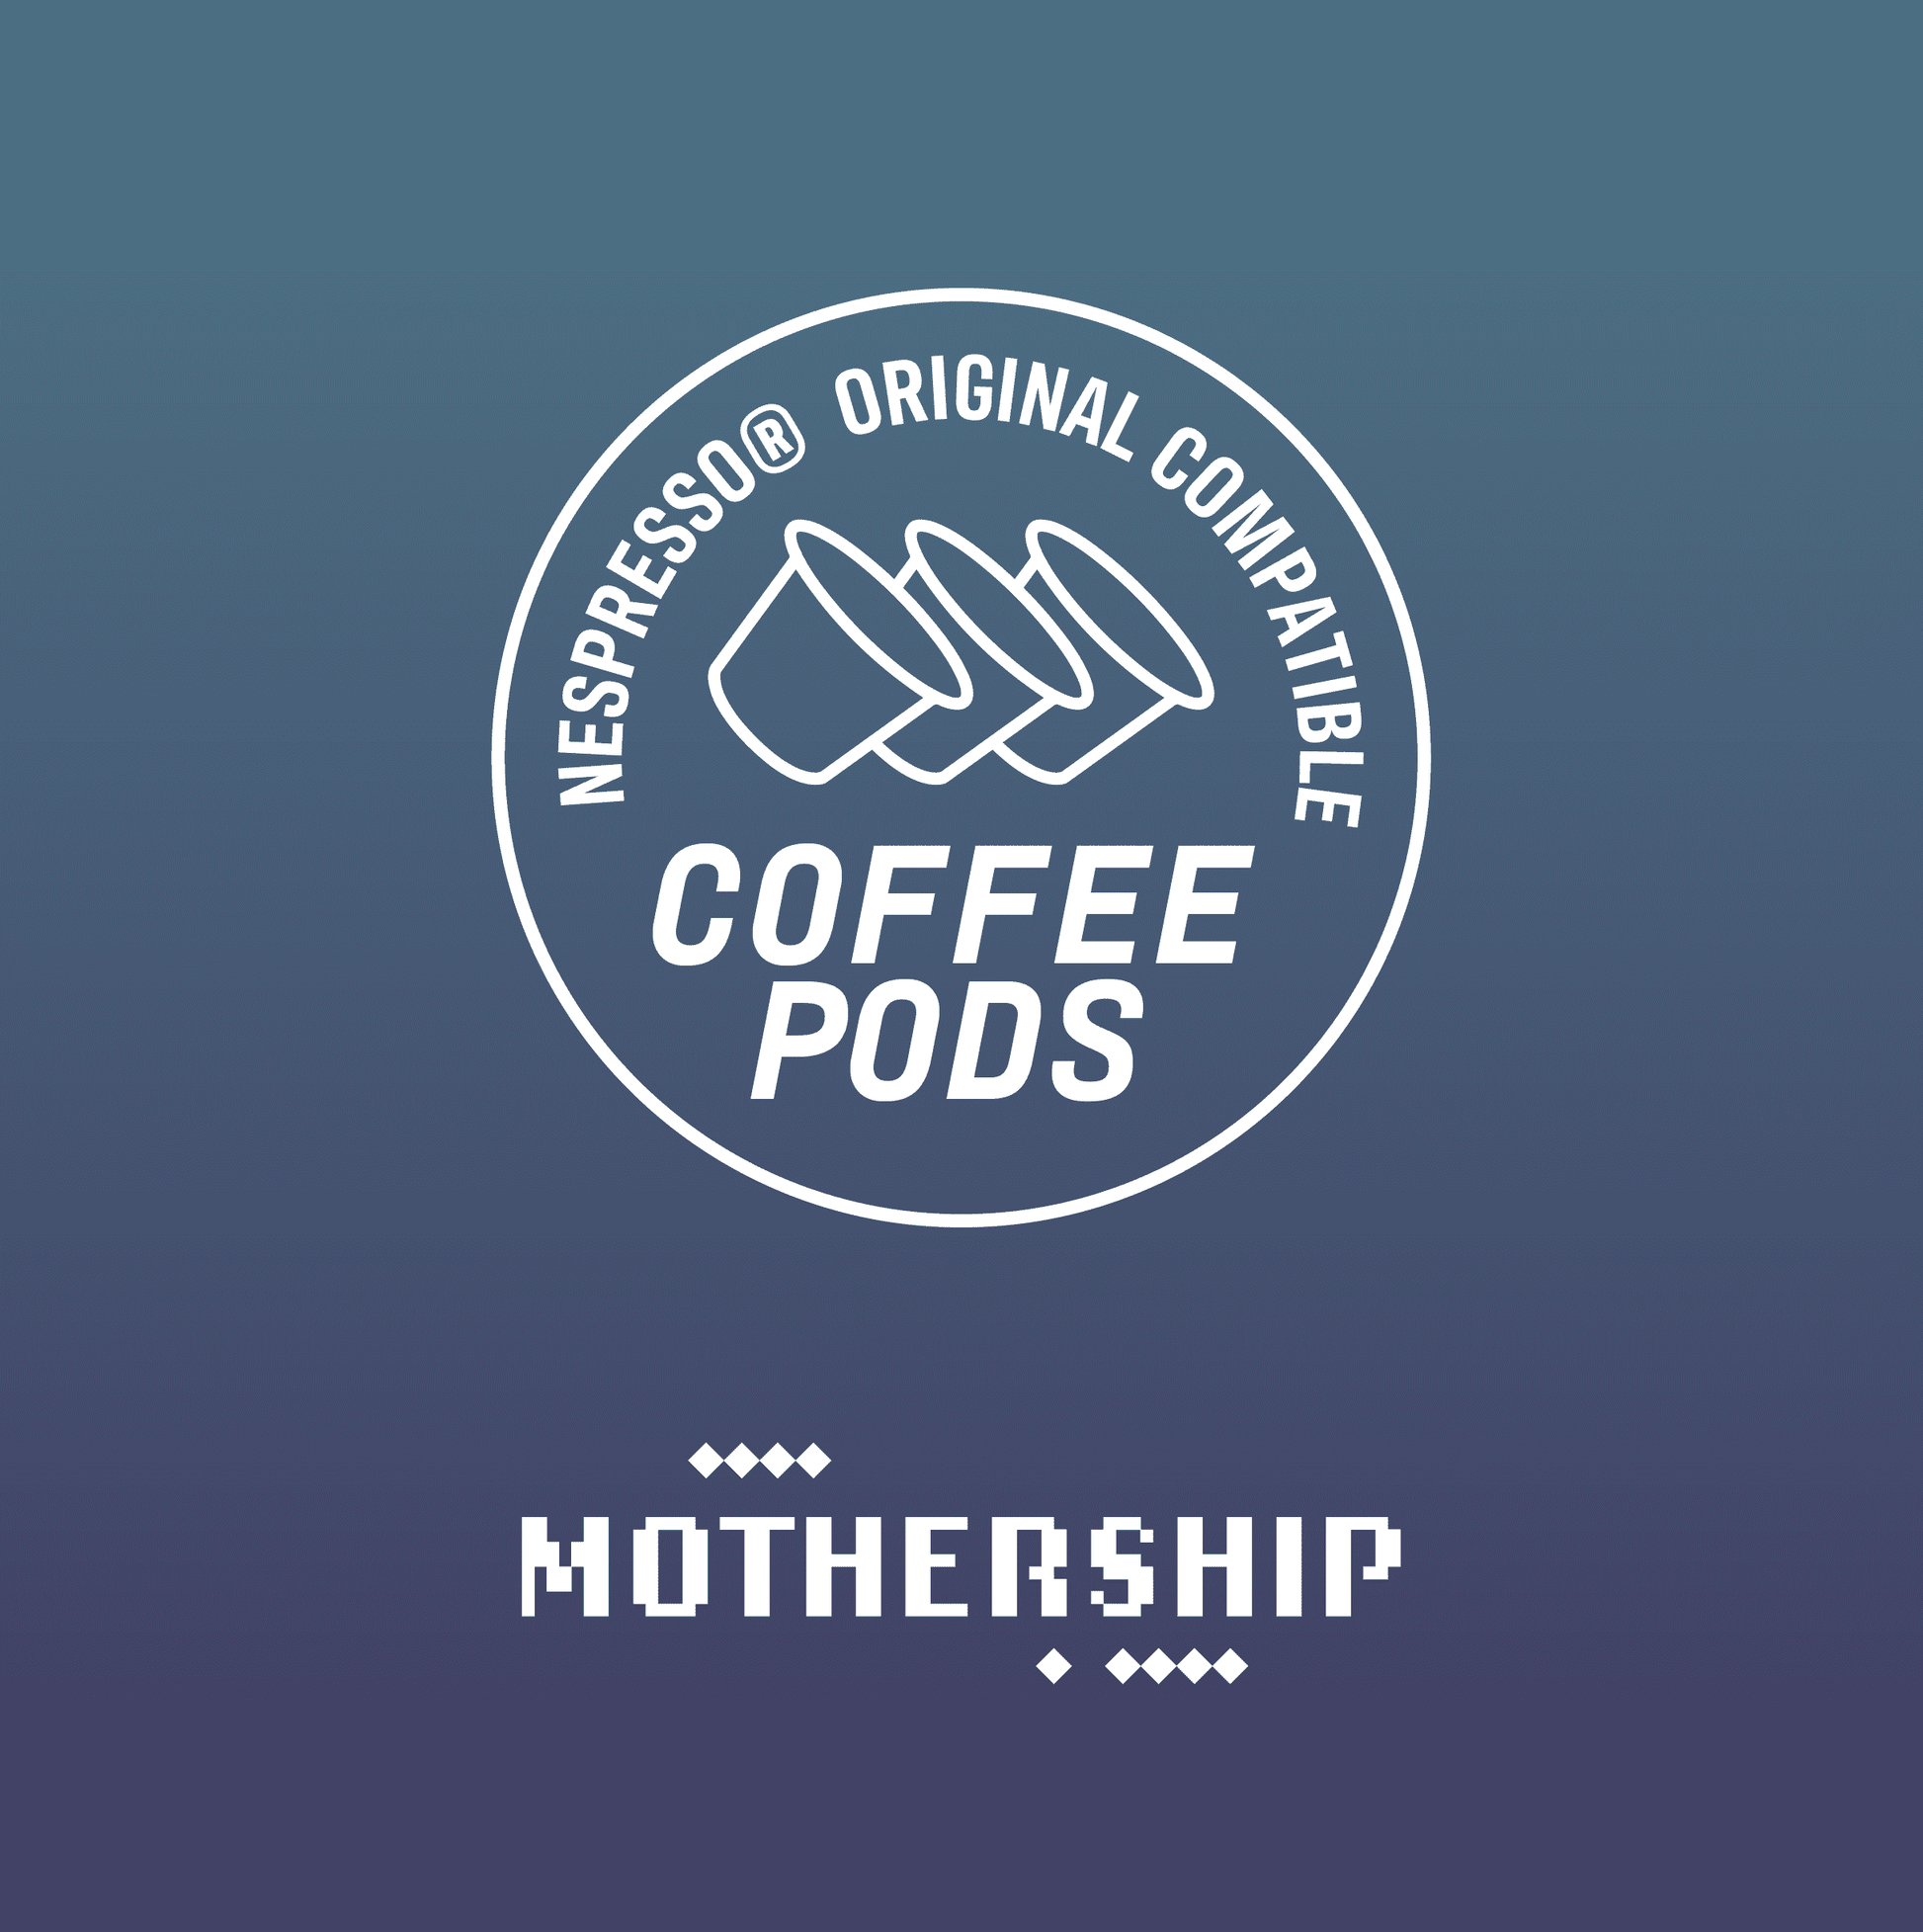 Mothership Blend - 20 Pods Subscription - 6 months - Weekly Delivery.